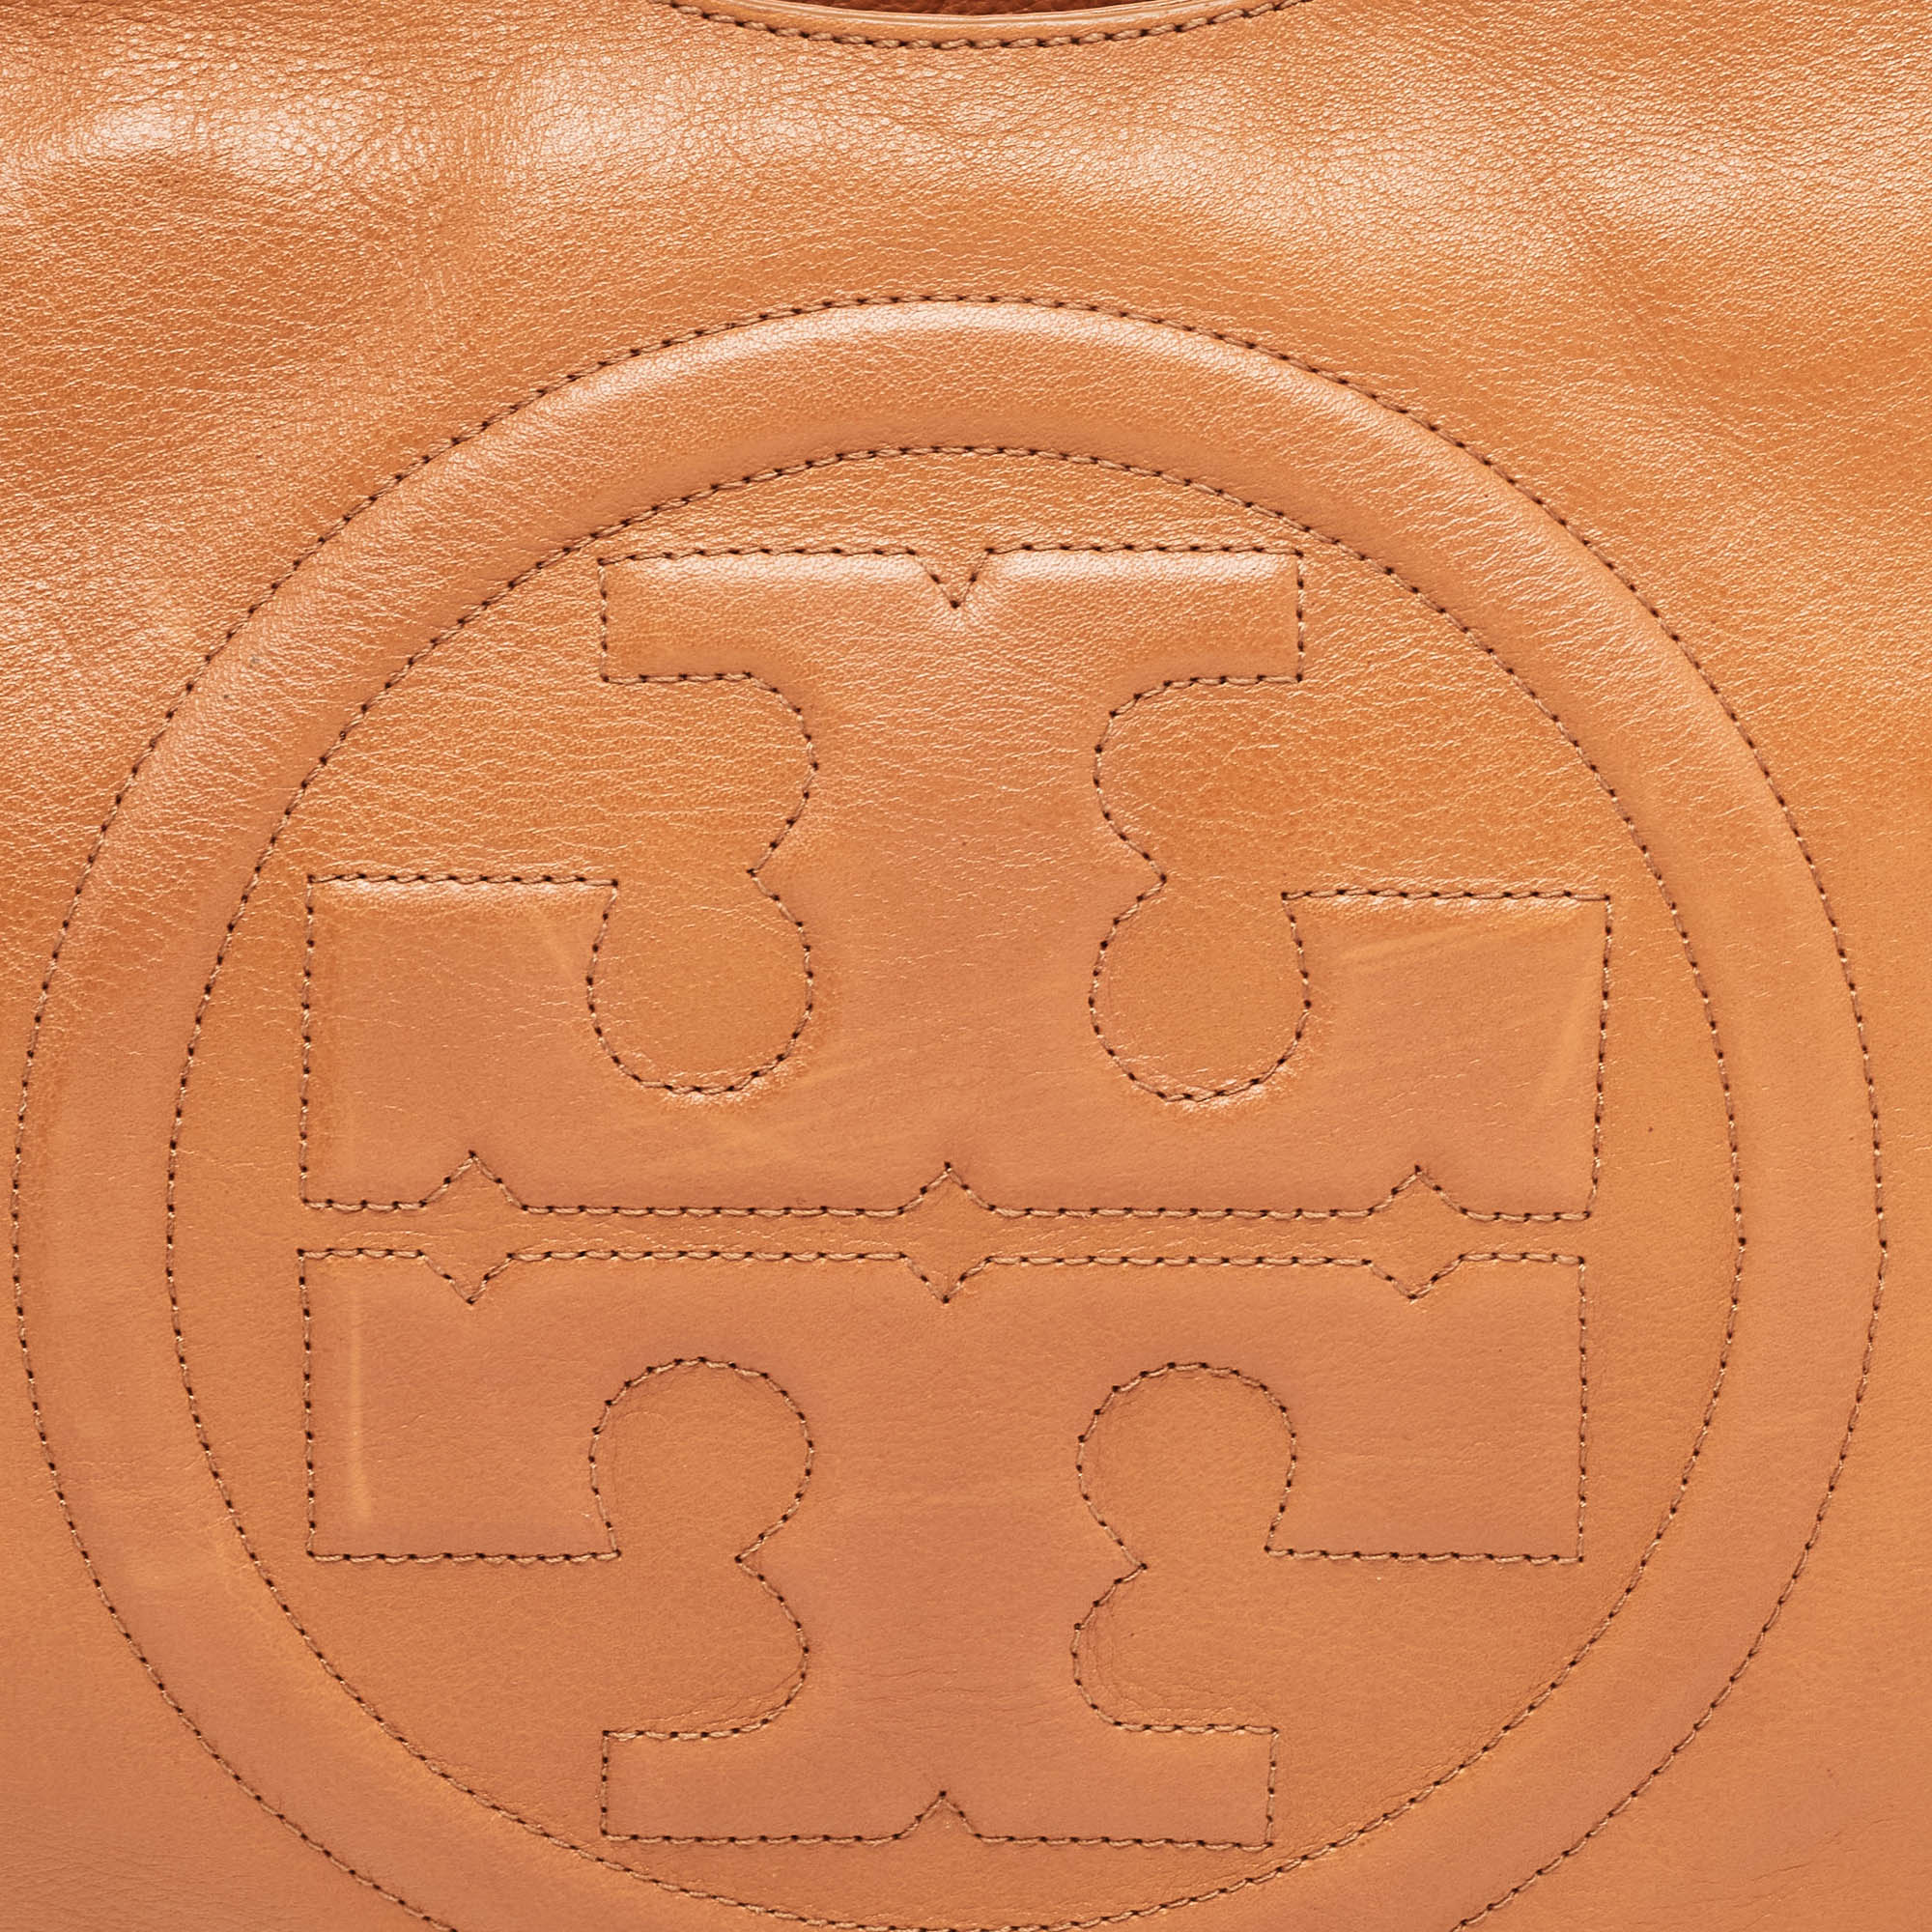 Tory Burch Brown Leather Bombe Tote